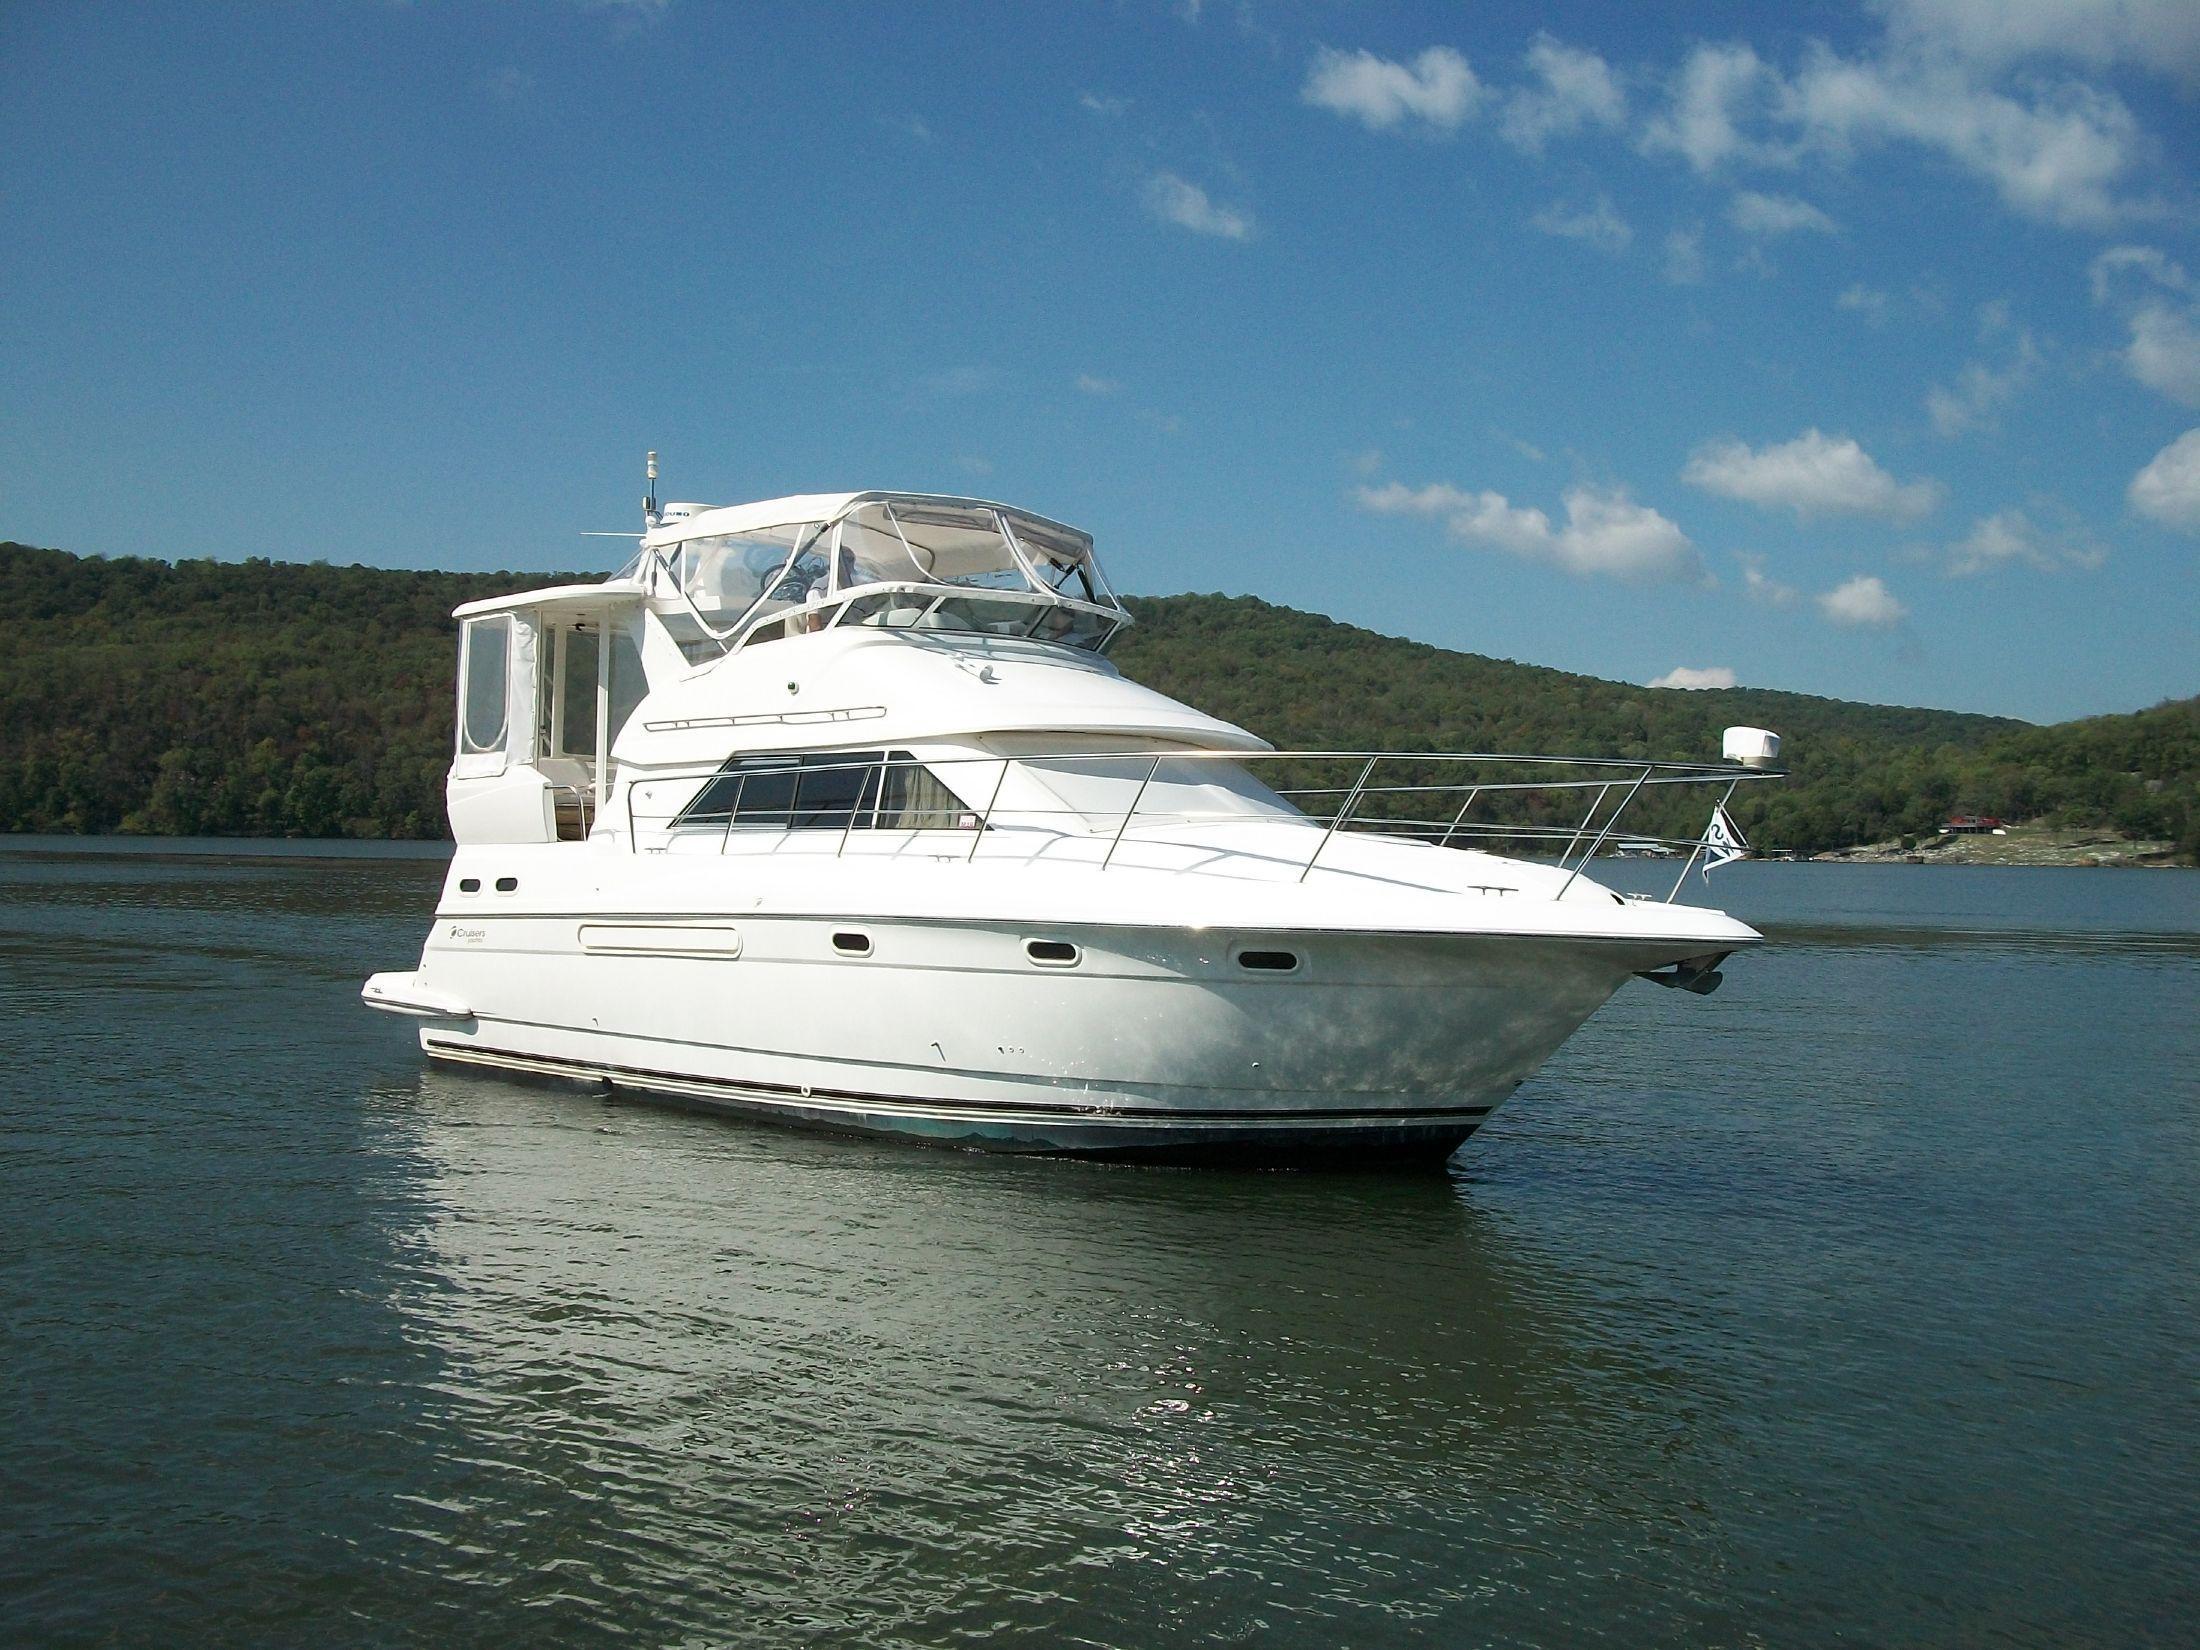 Cruisers Yachts 3750 Motoryacht, Knoxville